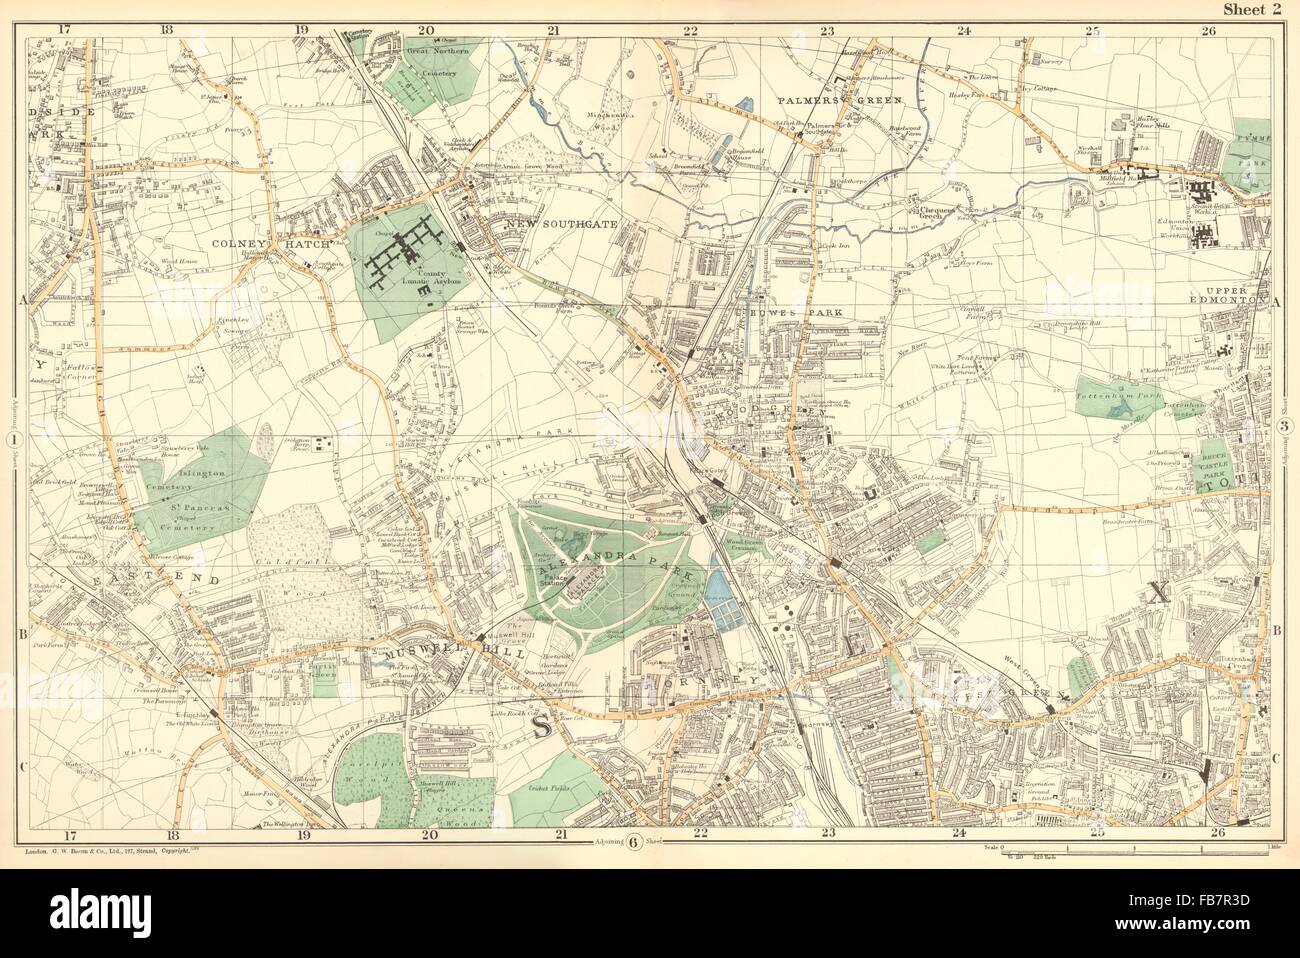 FRIERN BARNET/HORNSEY:Palmers/Wood Green,Southgate,Muswell Hill.BACON, 1902 Mappa Foto Stock